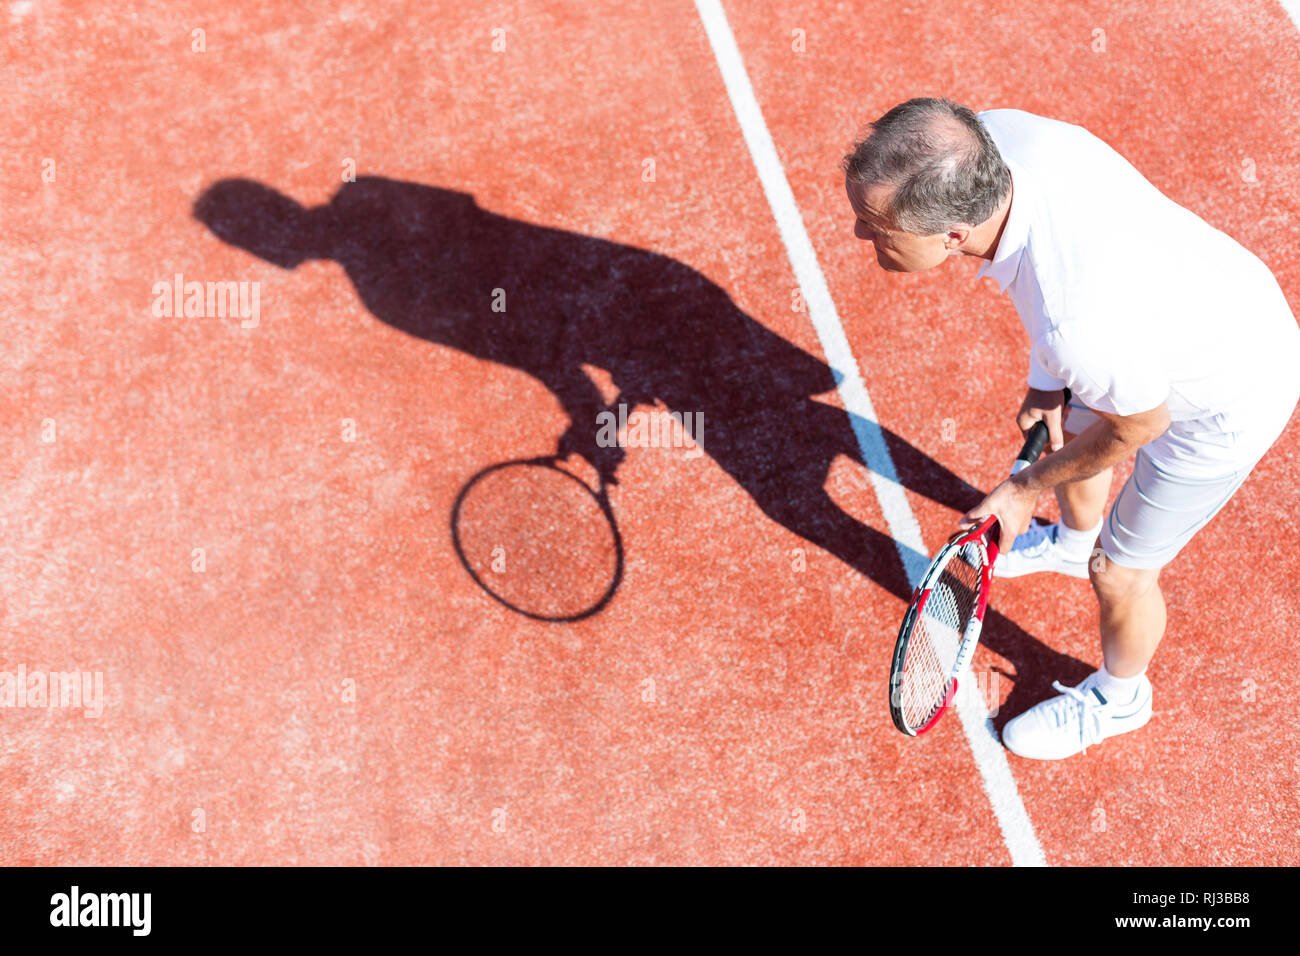 Full length of senior man playing tennis on red court during summer weekend Stock Photo